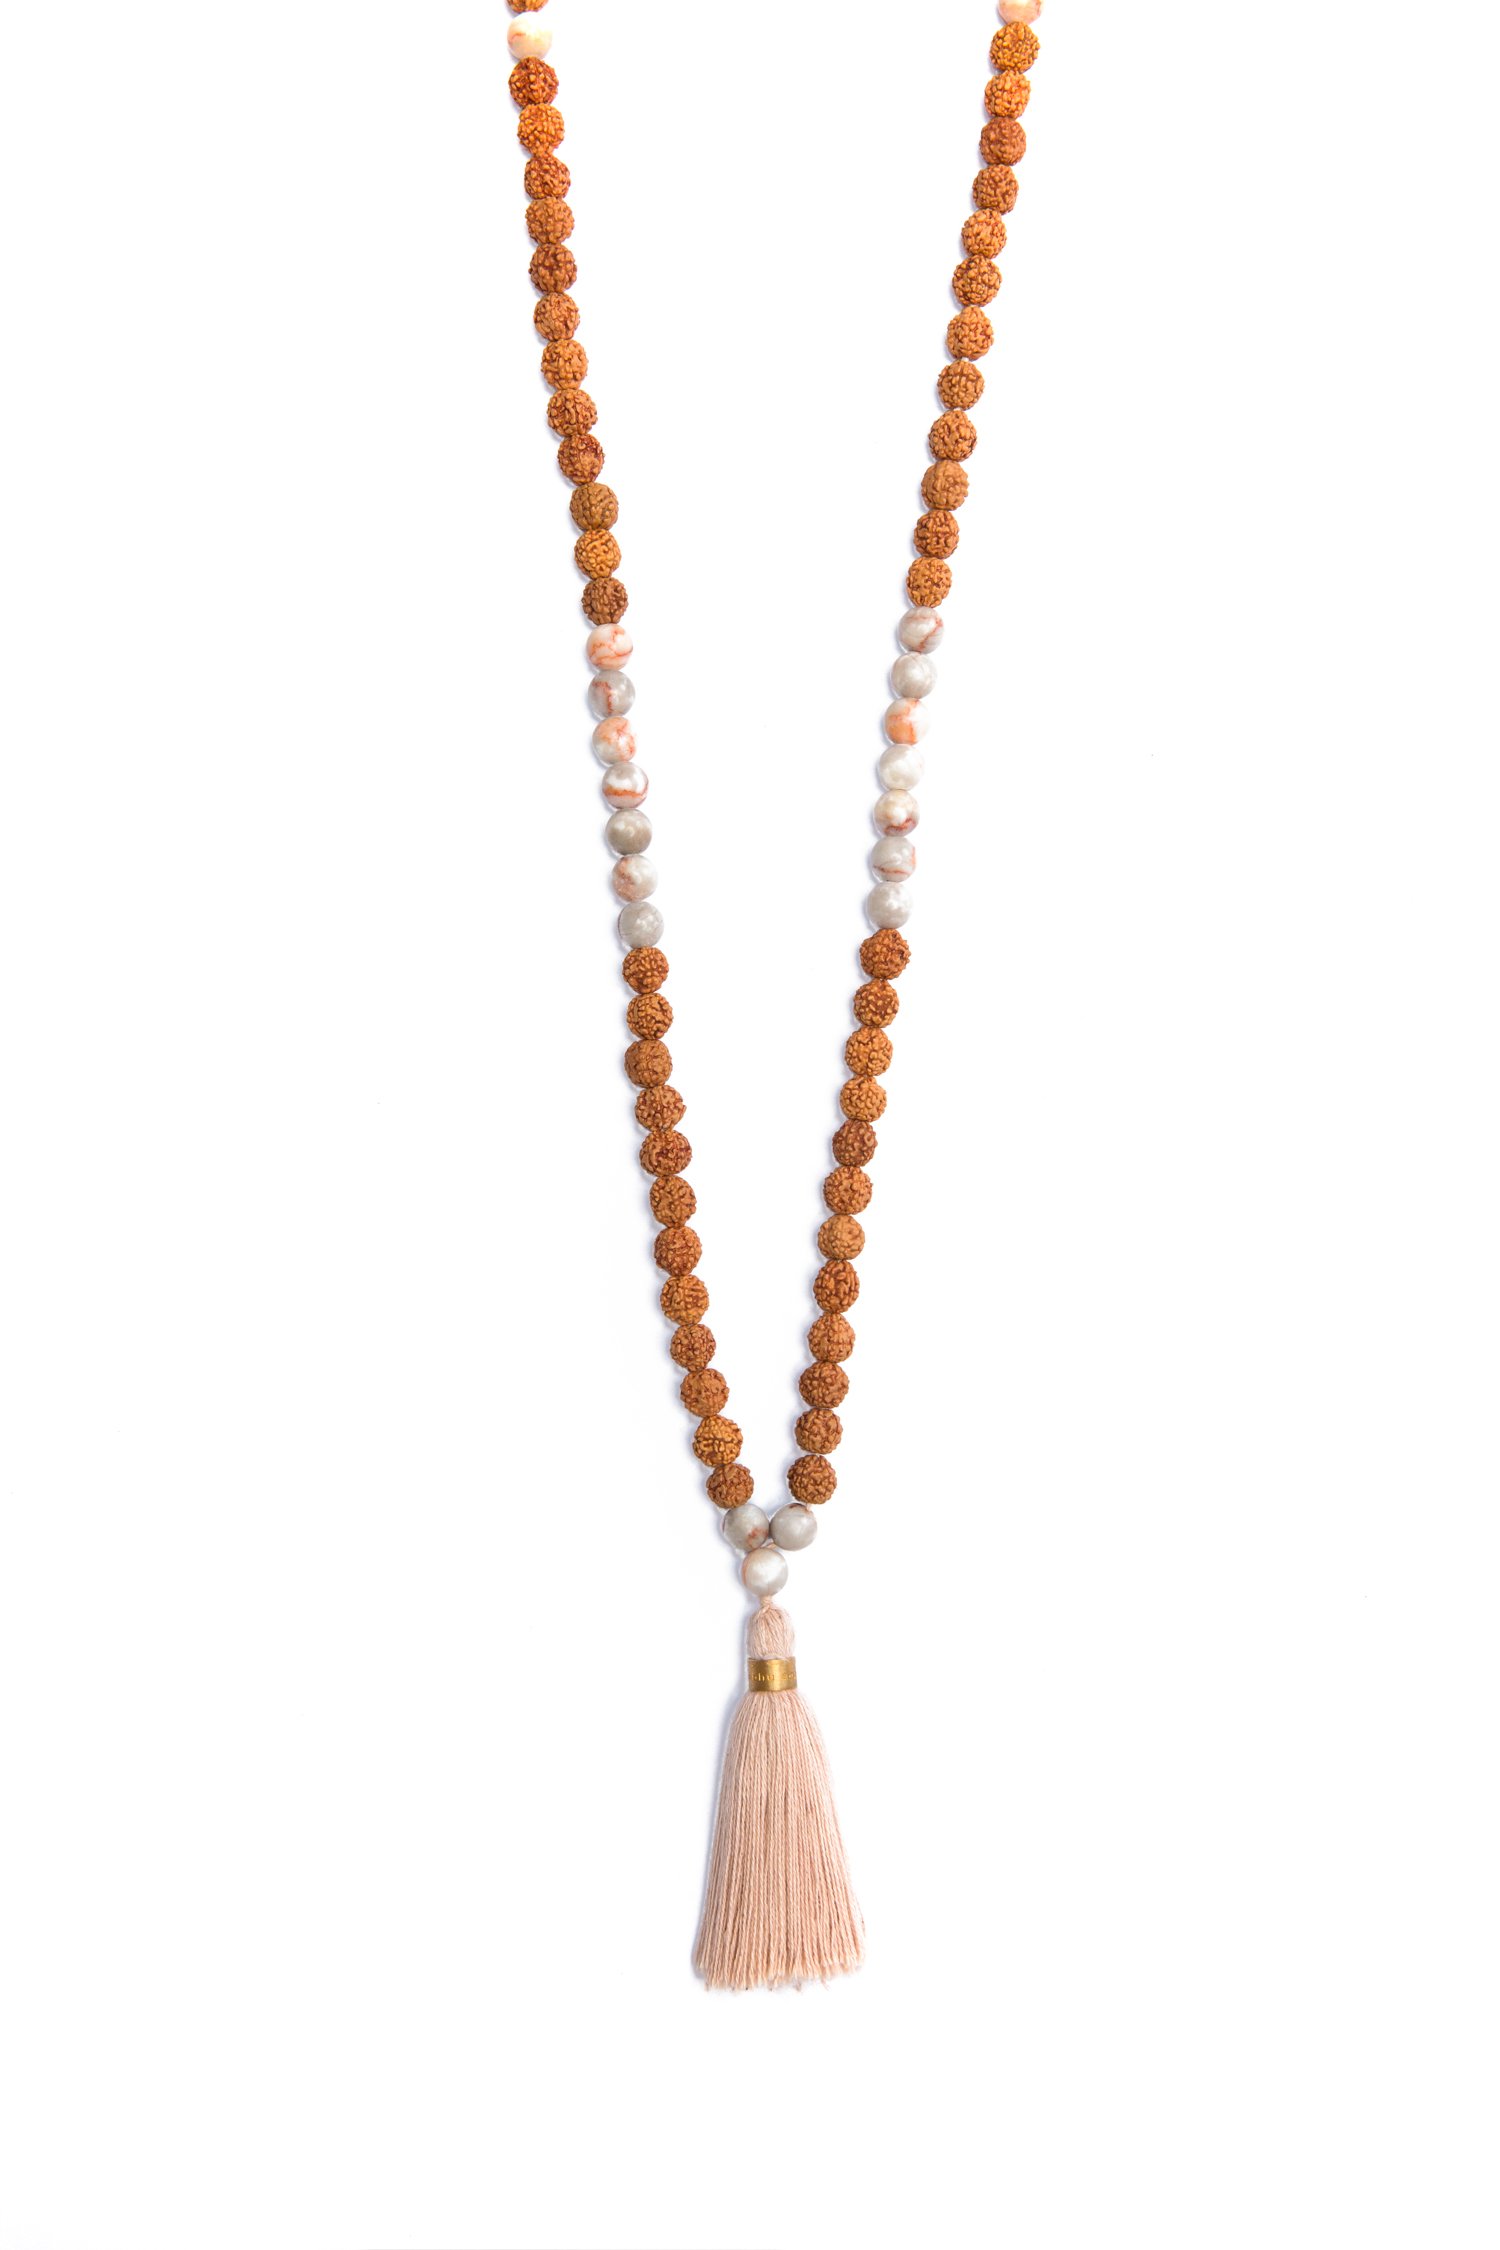 The Path of the Heart Mala